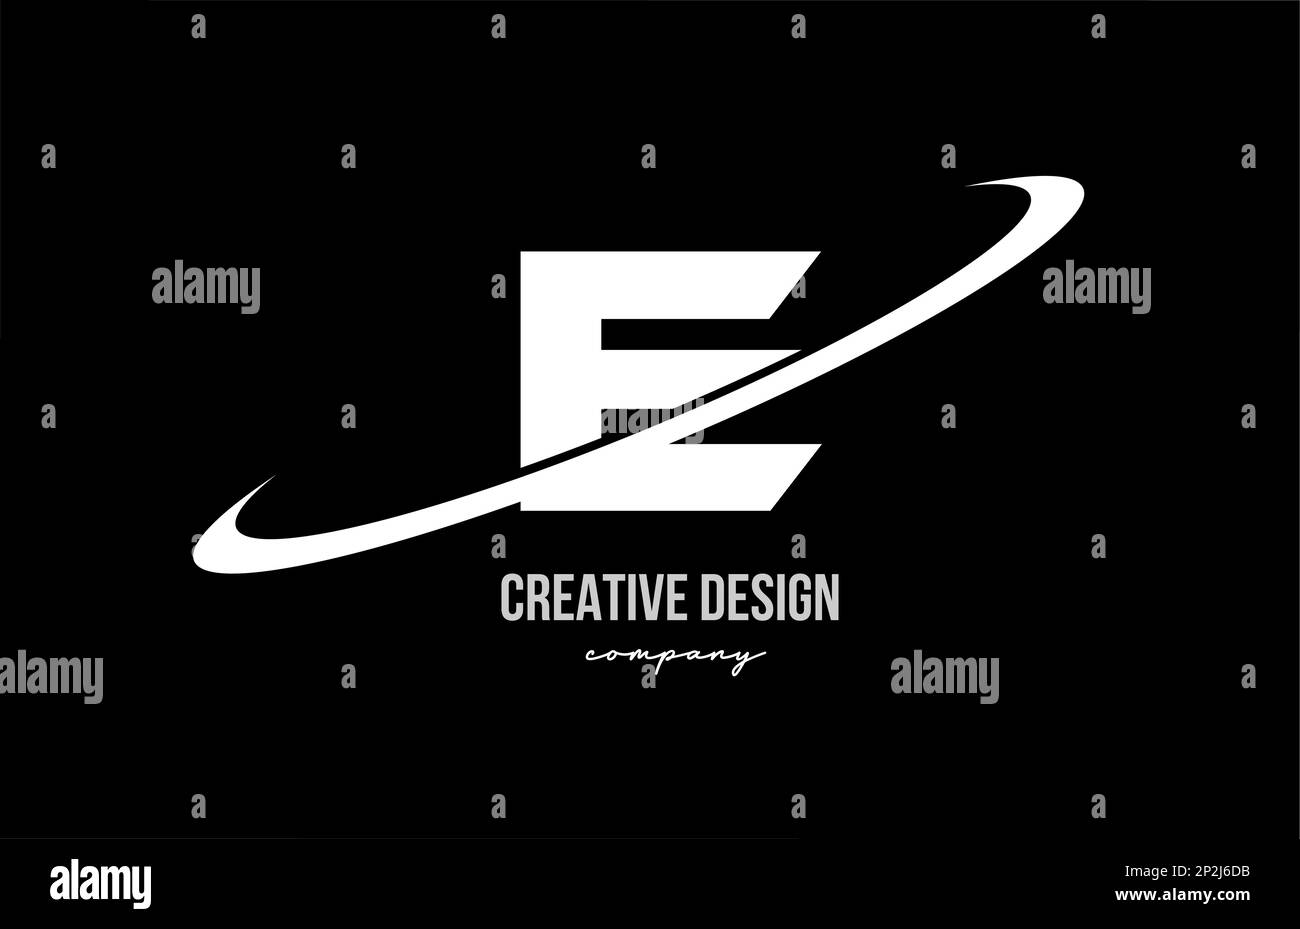 Black white E alphabet letter logo with big swoosh. Corporate creative template design for business and company Stock Vector